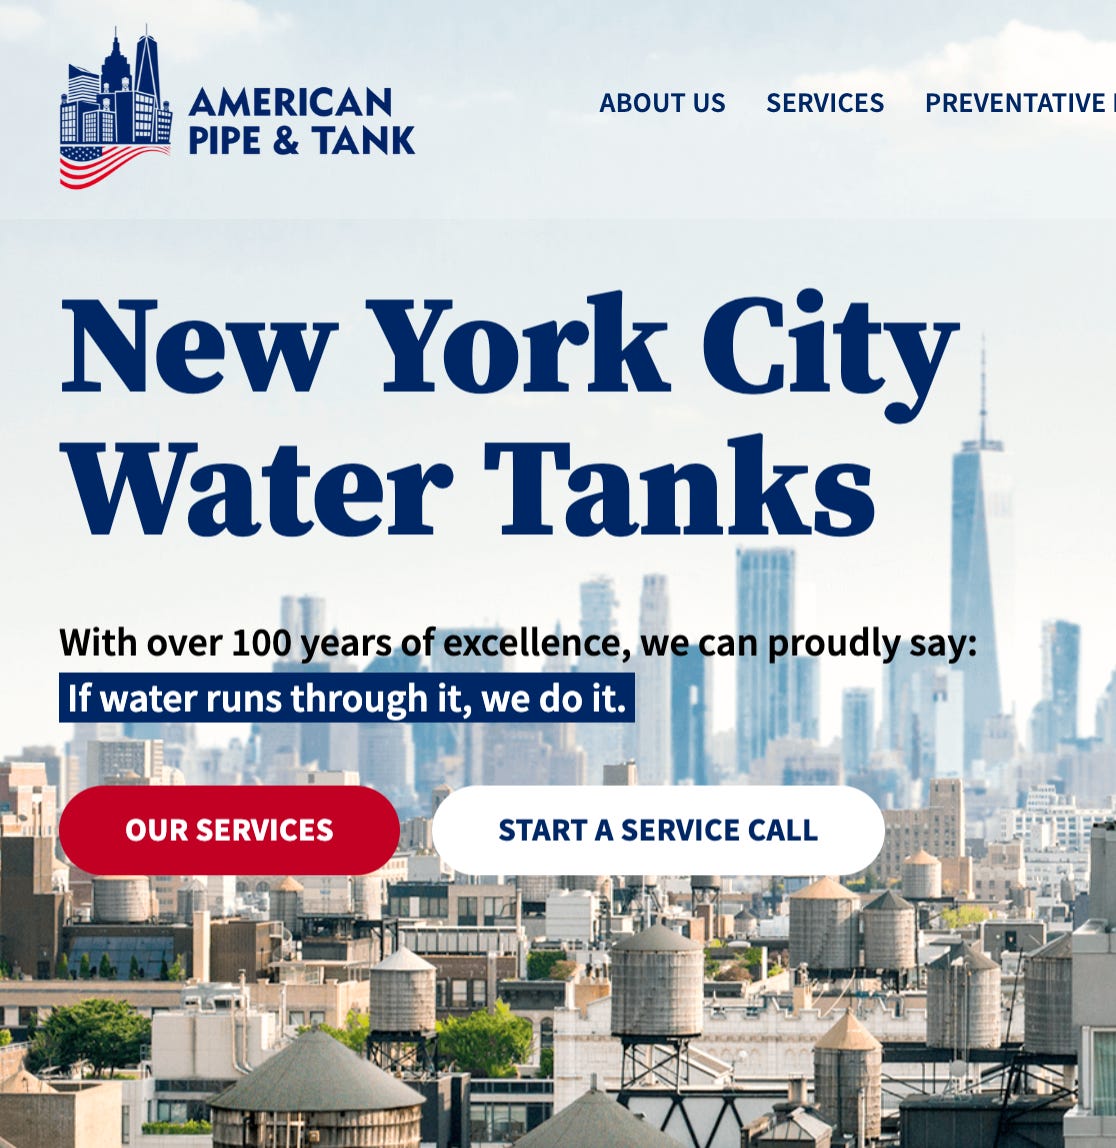 A screenshot of the New York City Water Tanks section of the American Pipe & Tank website. It reads "With over 100 years of excellence, we can proudly say: 'if water runs through it, we do it.'”